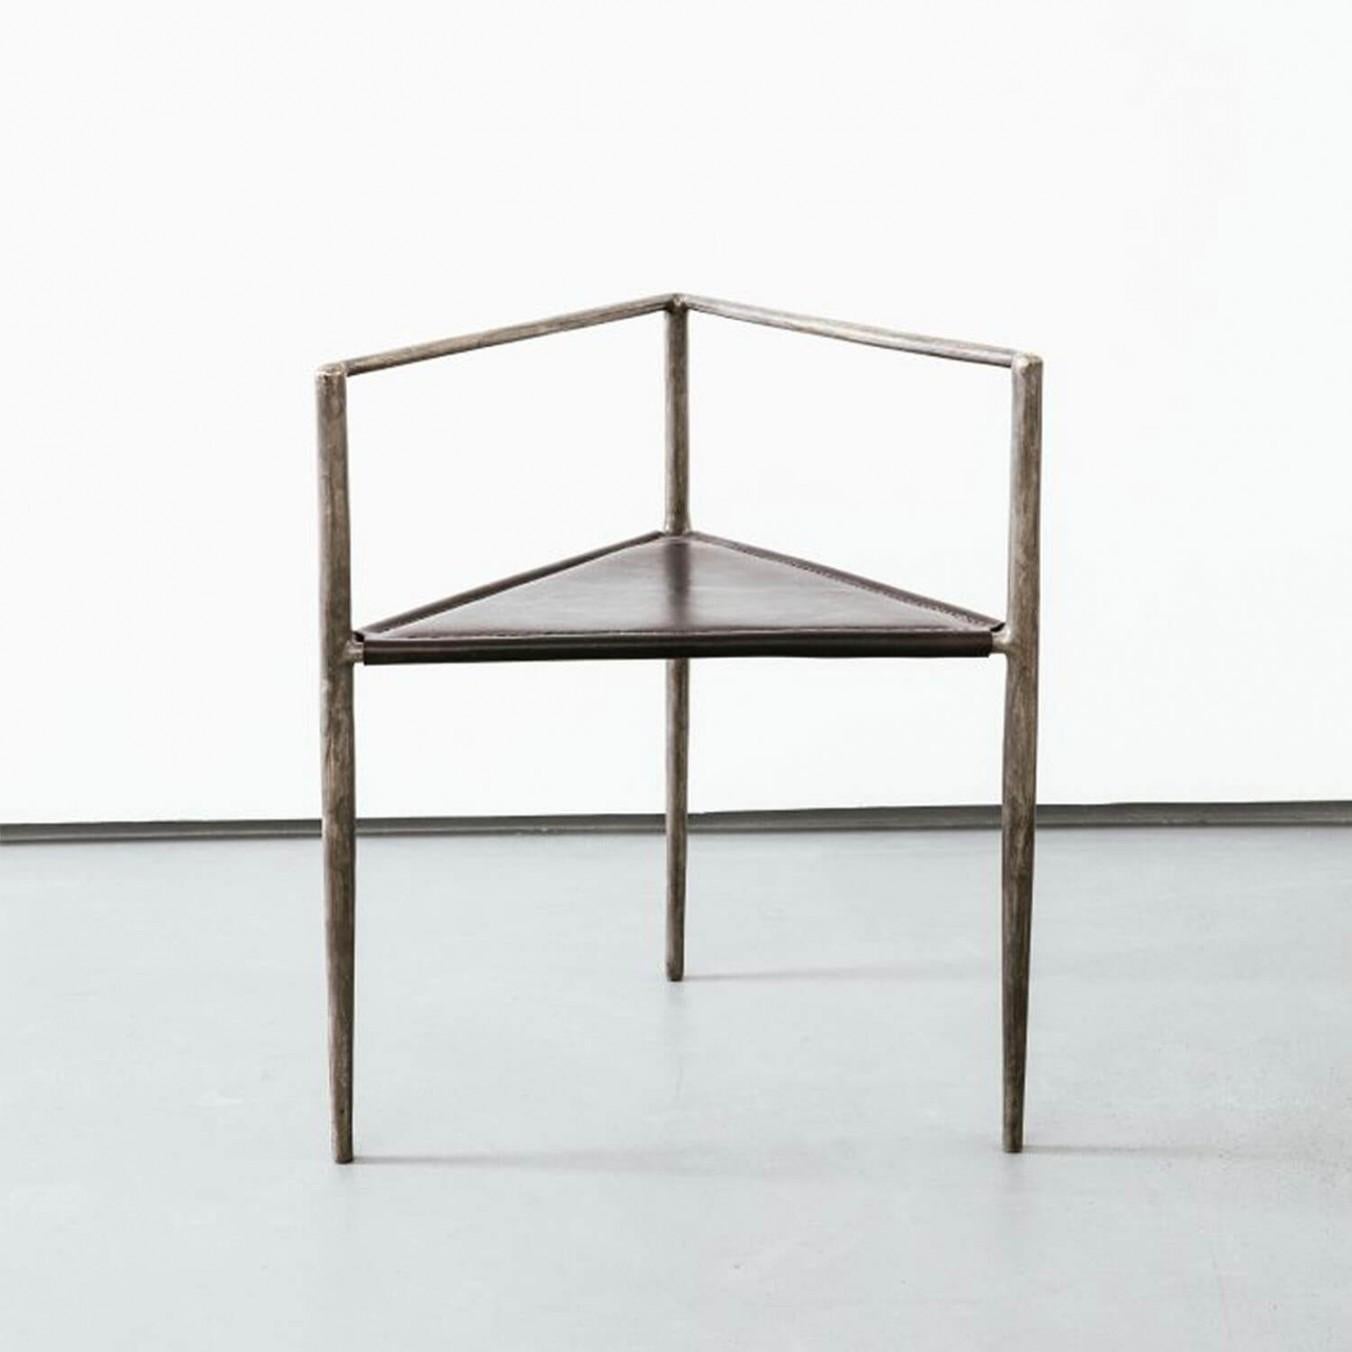 Contemporary bronze stool - Alchemy bar stool by Rick Owens
2012
L 62cm x W 50cm x H 71cm
Materials : Bronze, Leather
Weight : 20 kg

Available in black finish or Nitrate (Dark Brown) finish.

Rick Owens is a California-born fashion and